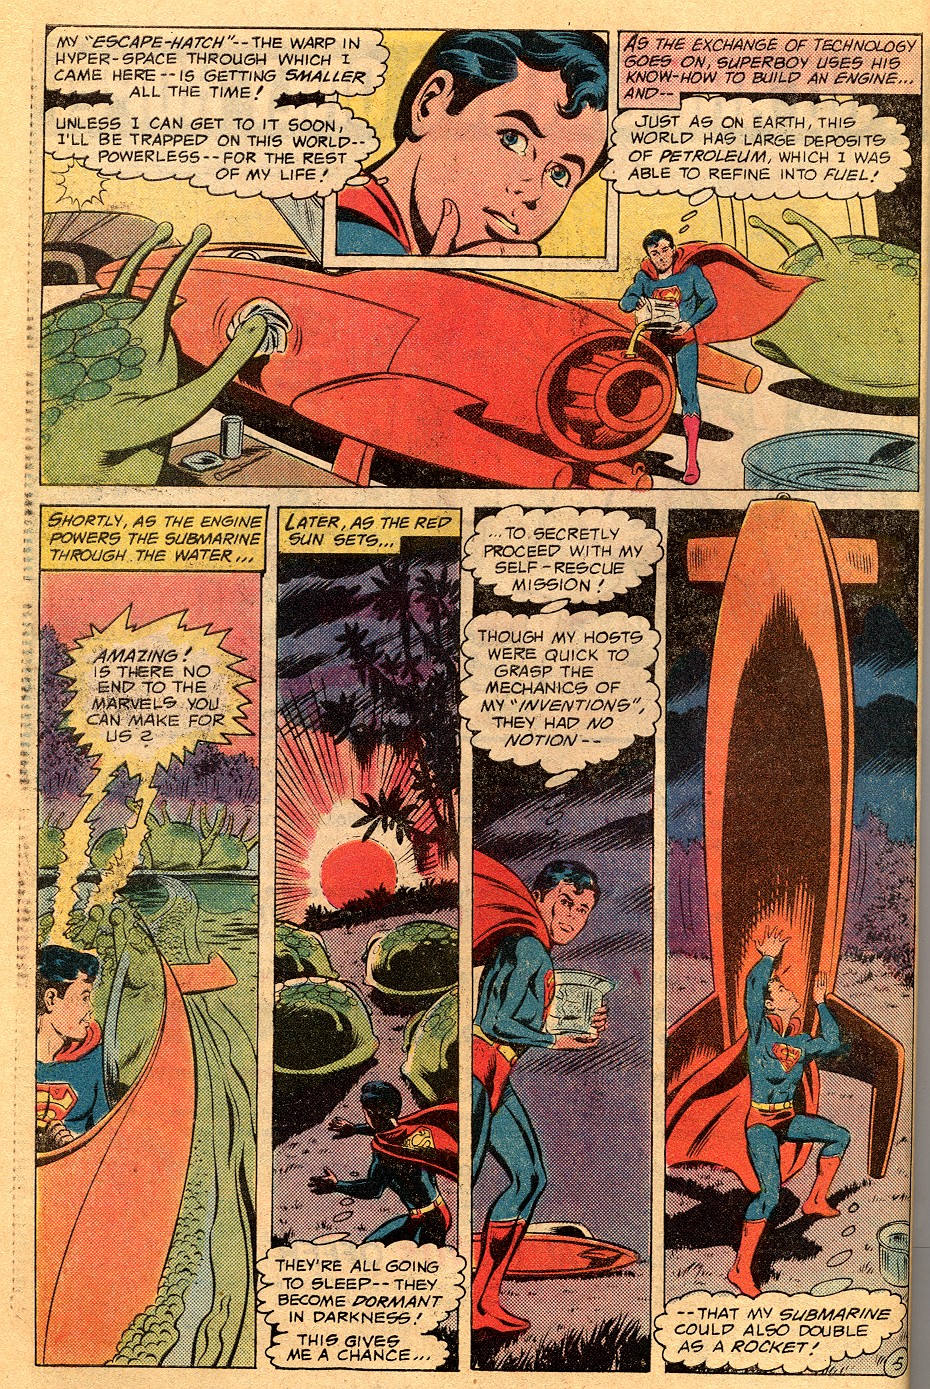 The New Adventures of Superboy 21 Page 29